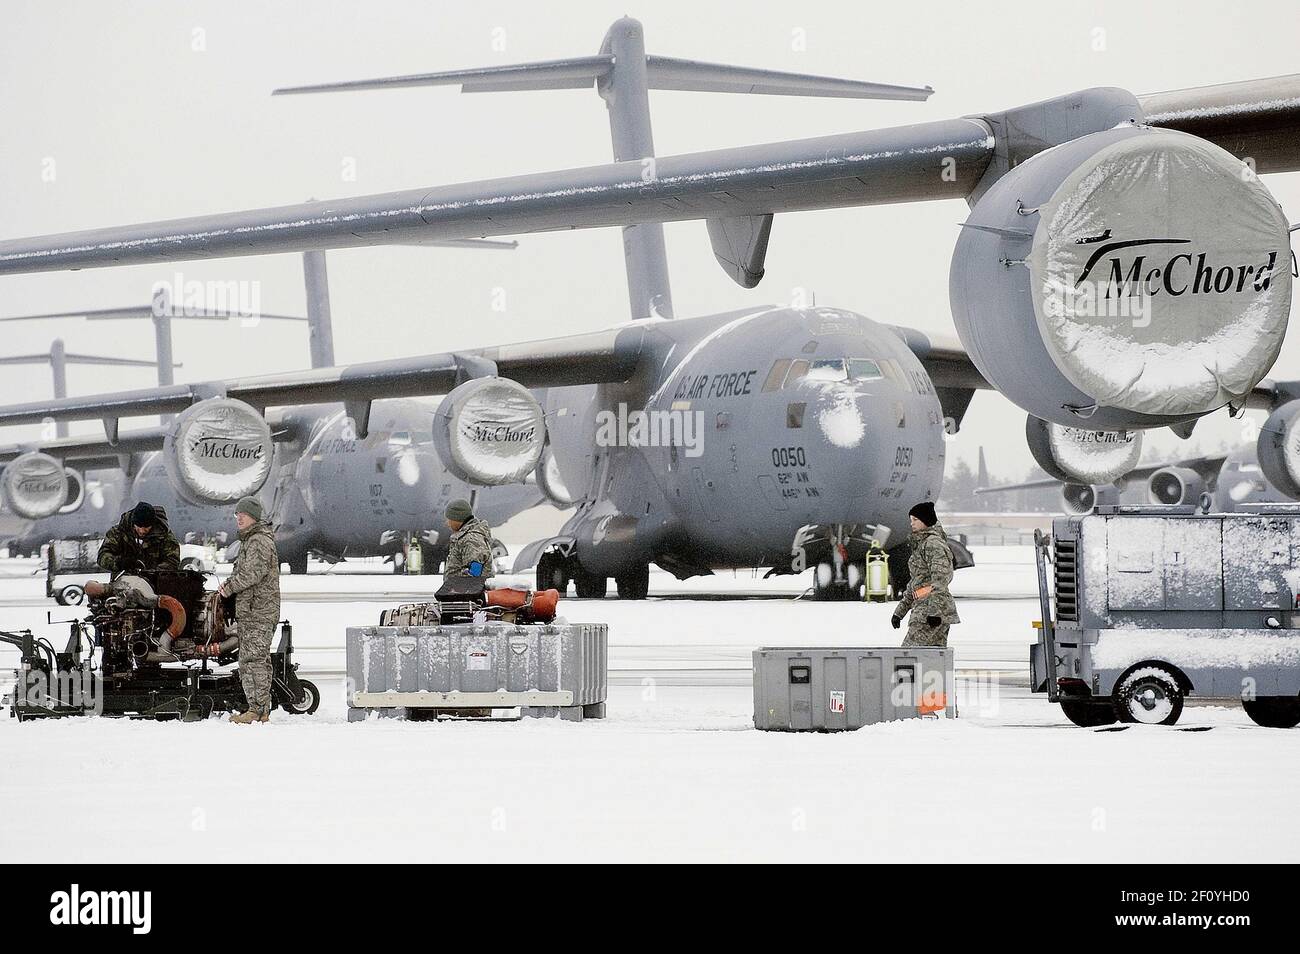 17 December 2008 - Washington, DC - U.S. Air Force maintainers, assigned to the 62nd Aircraft Maintenance Squadron, prepare to install an auxiliary power unit on a C-17 Globemaster III aircraft at McChord Air Force Base, Wash., Dec. 17, 2008. Photo Credit: Abner Guzman/DOD/Sipa Press/0812221853 Stock Photo